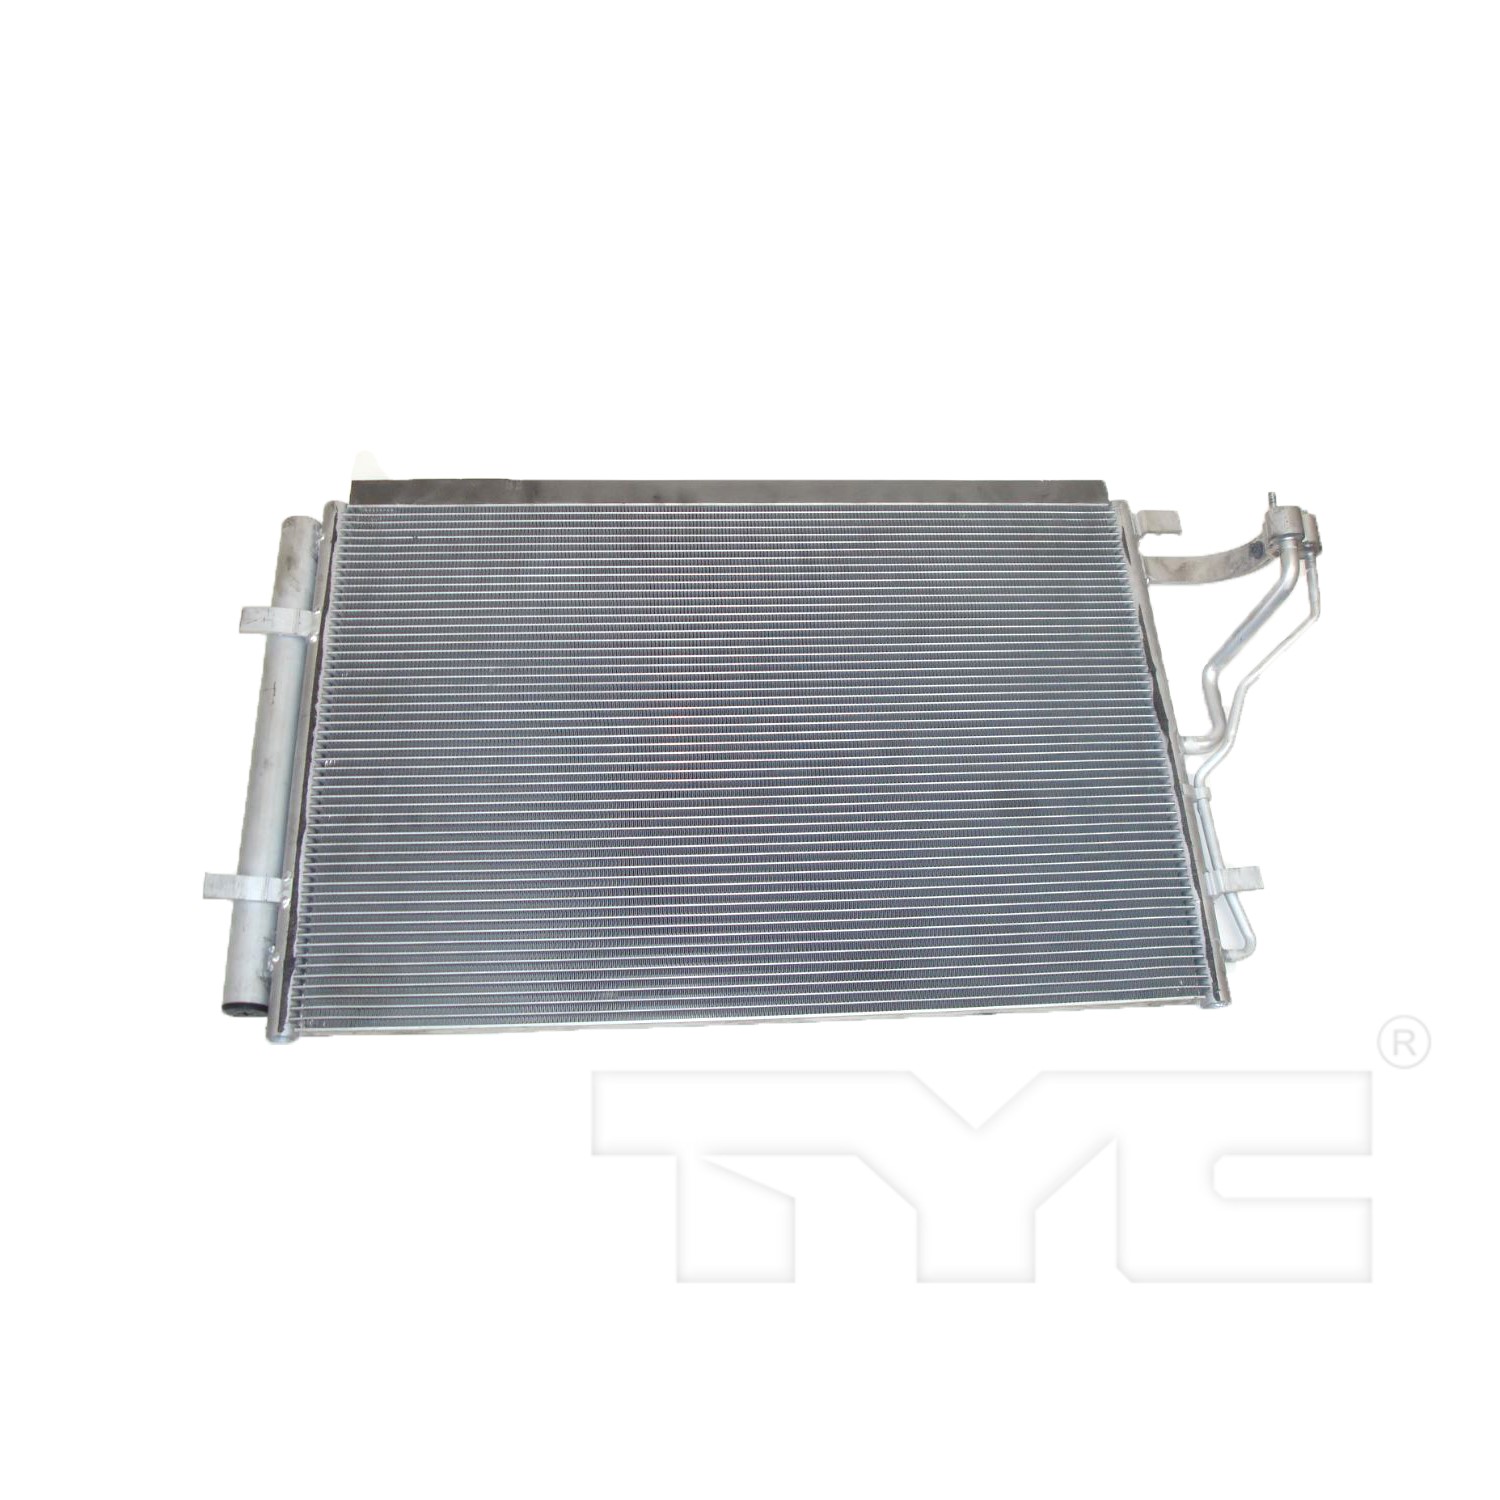 Aftermarket AC CONDENSERS for KIA - FORTE5, FORTE5,15-18,Air conditioning condenser